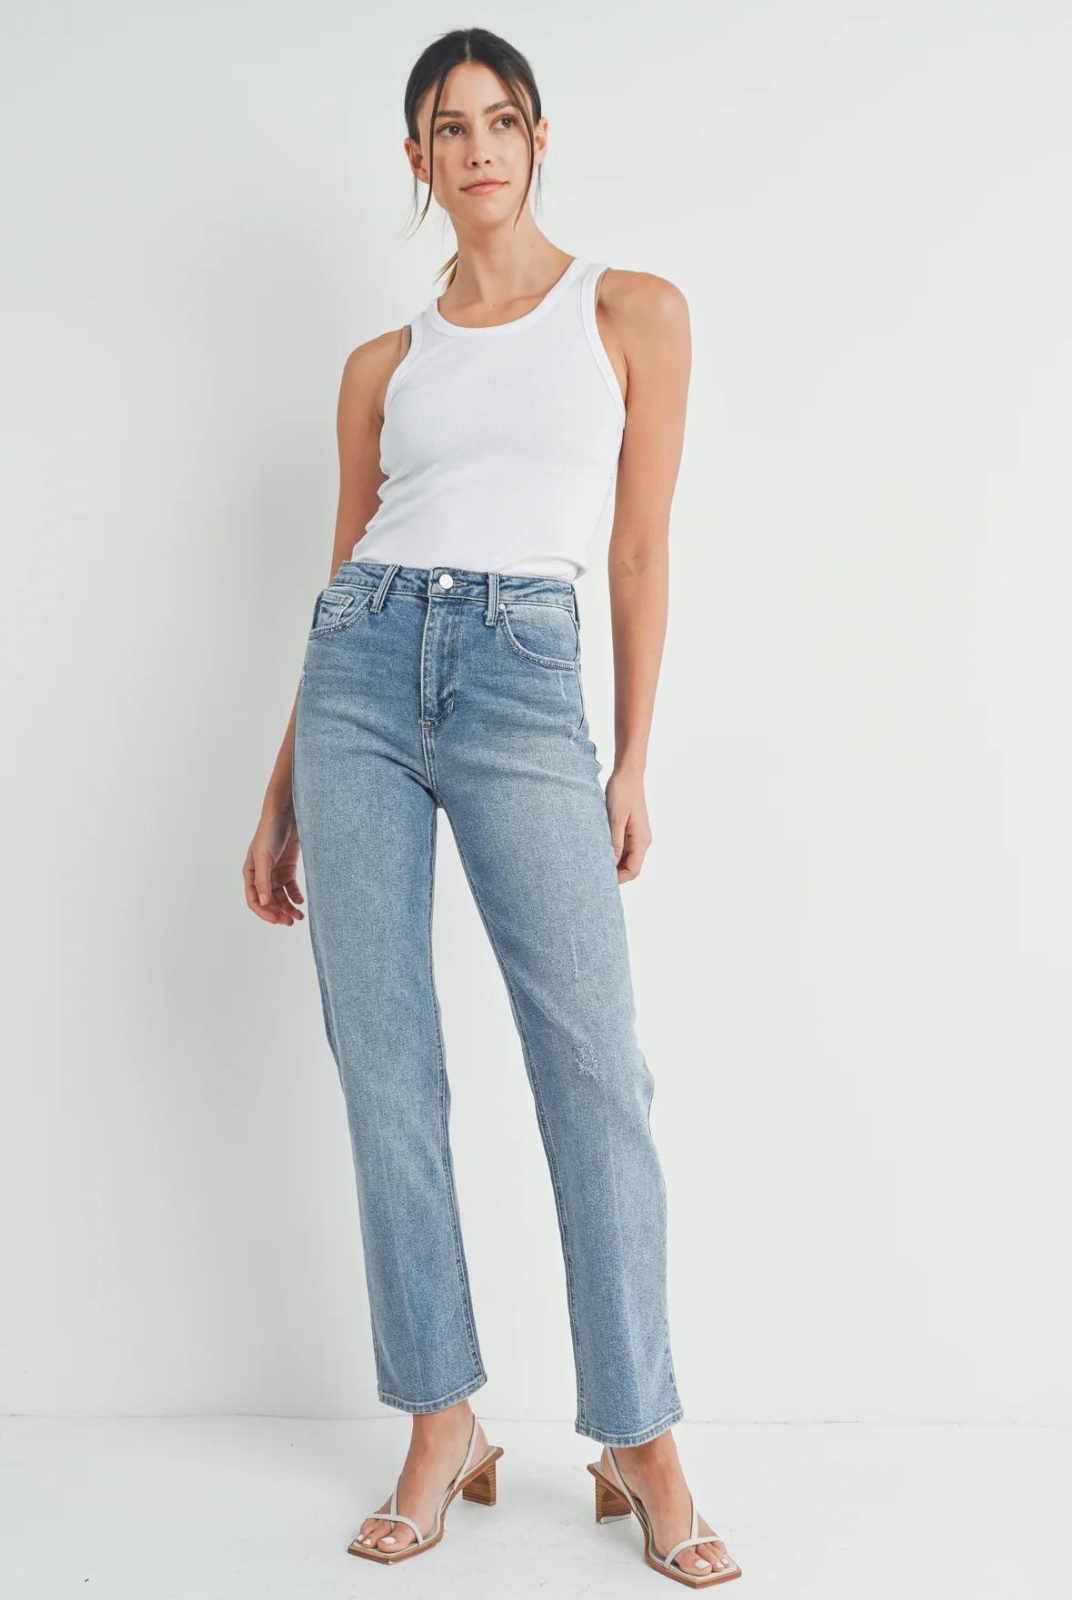 Just Black Denim The Everything Straight Jean.A high-waisted, medium rinse straight jean that’s everything you need for fall. Keep it casual with sneakers or dress it up with heels for an on-trend outfit every time.  